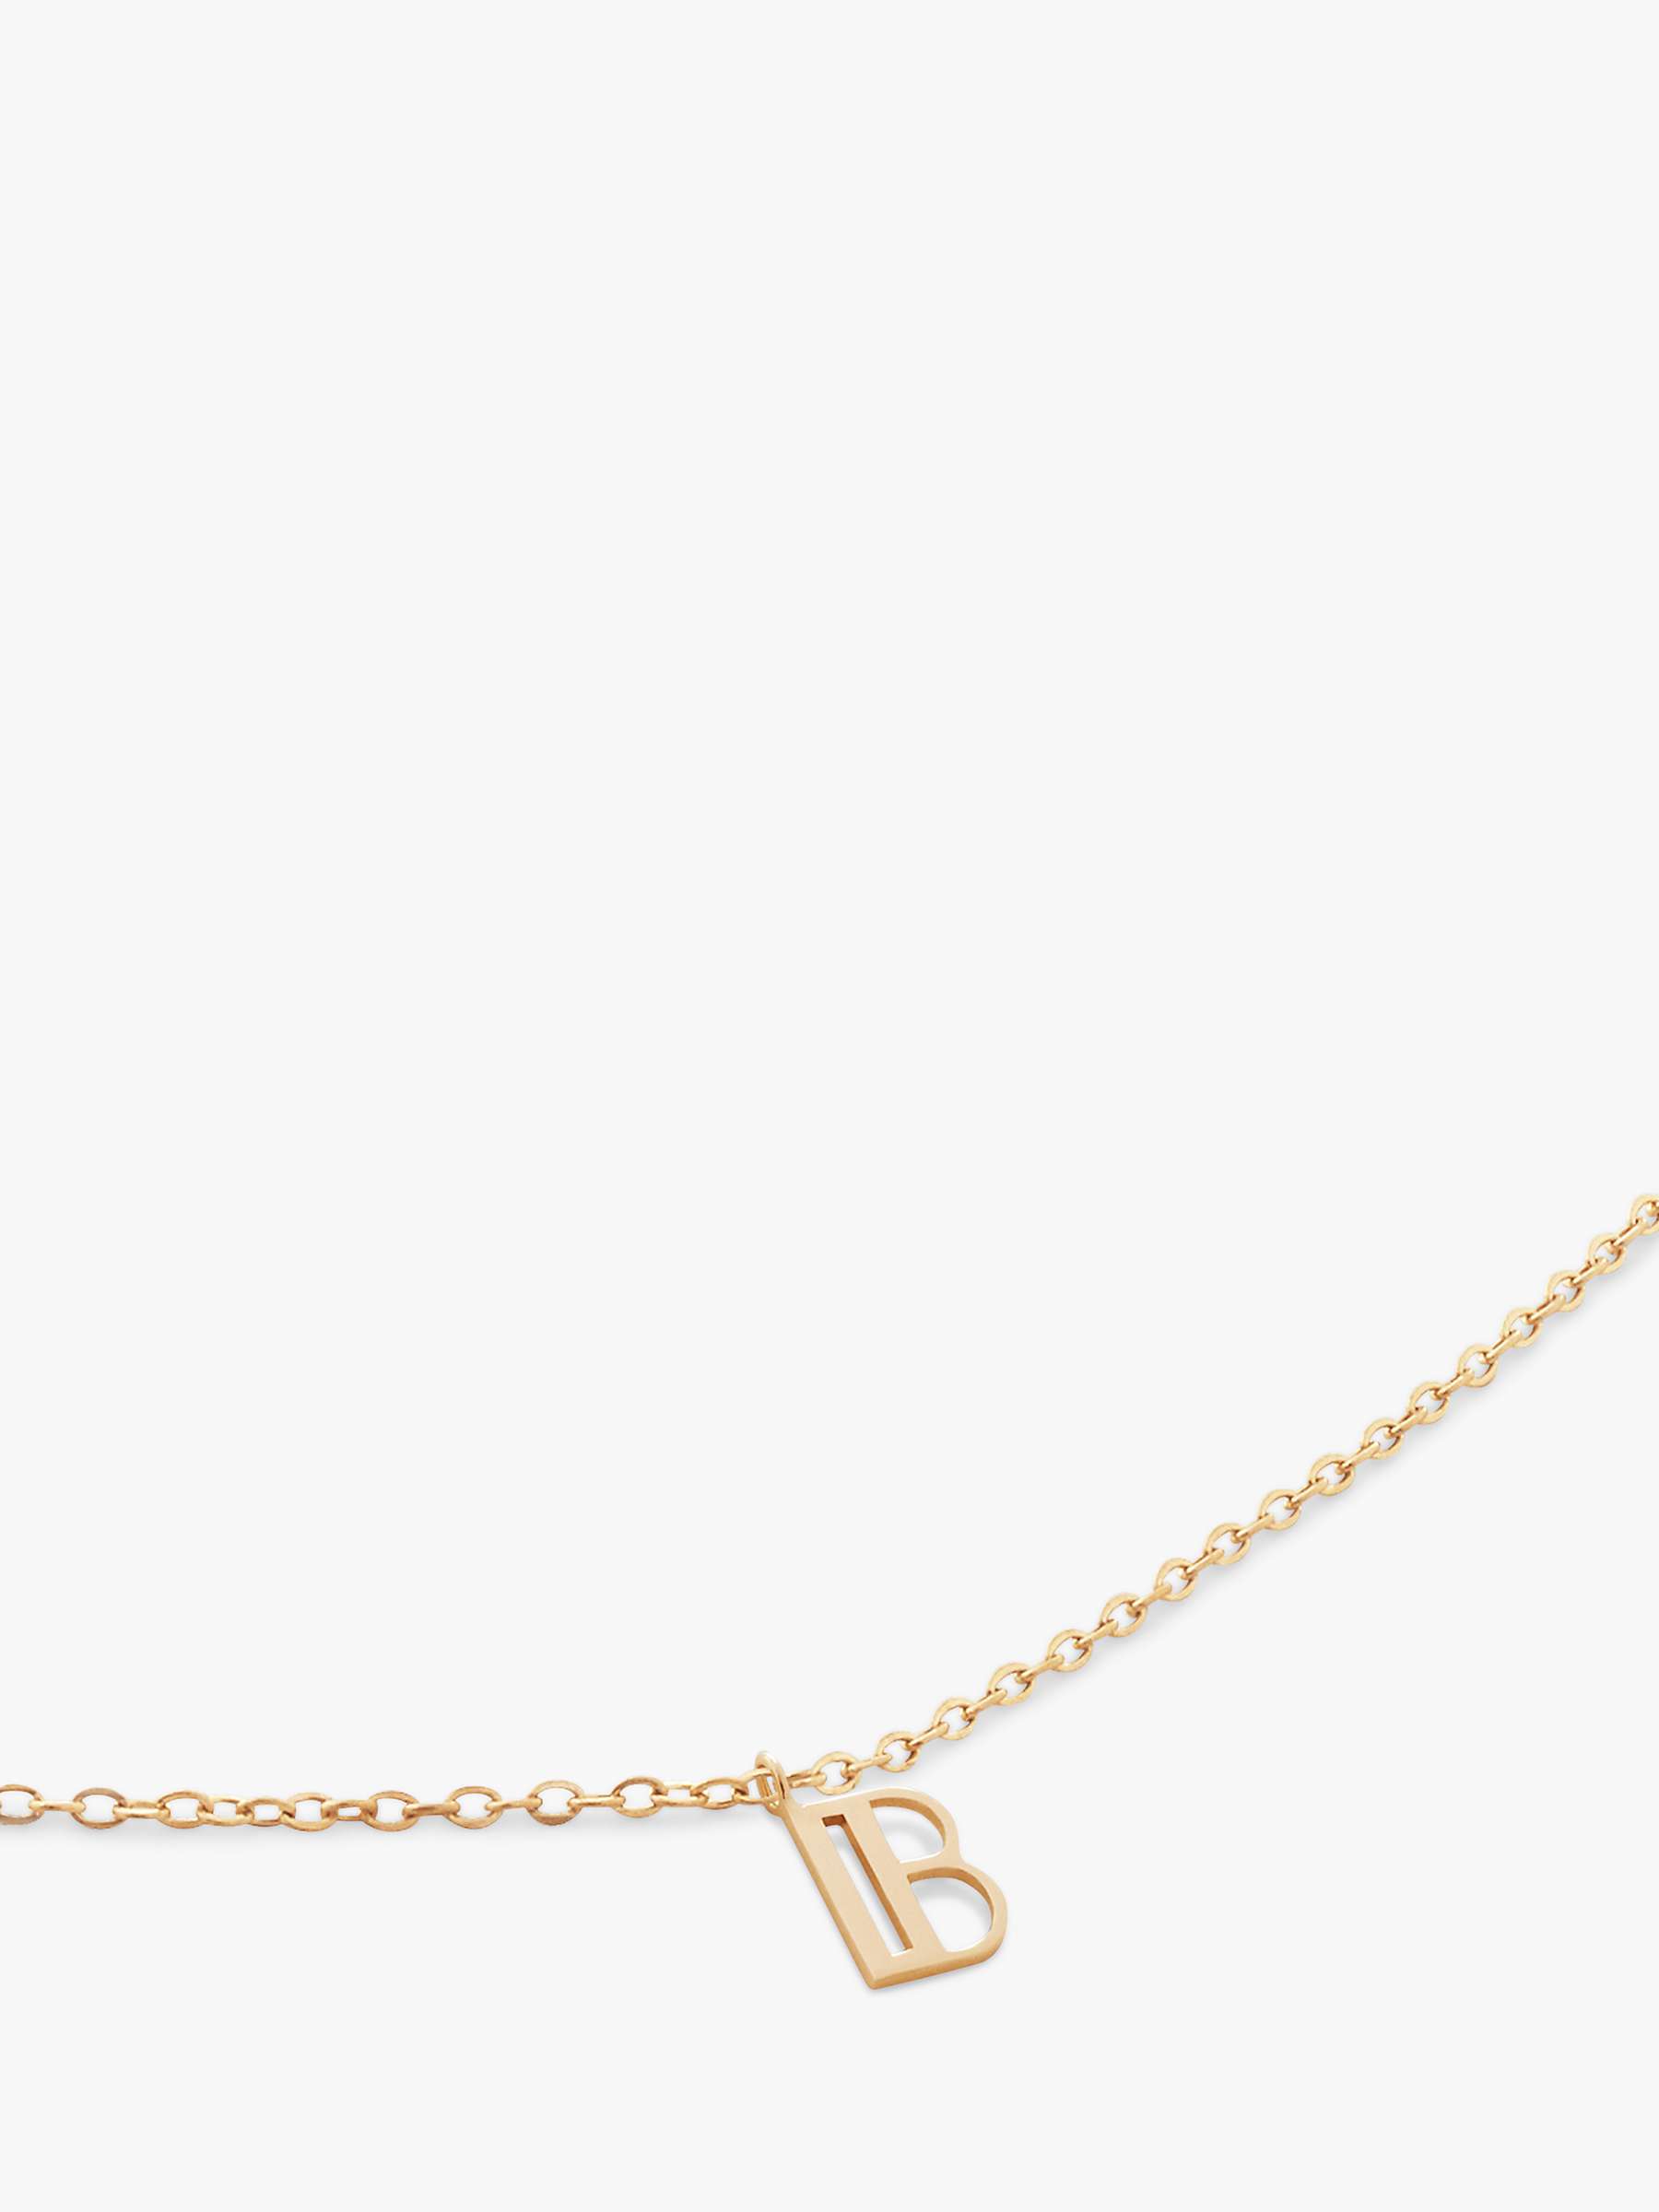 Buy Monica Vinader Yellow Gold Small Initial Pendant Necklace, Gold Online at johnlewis.com